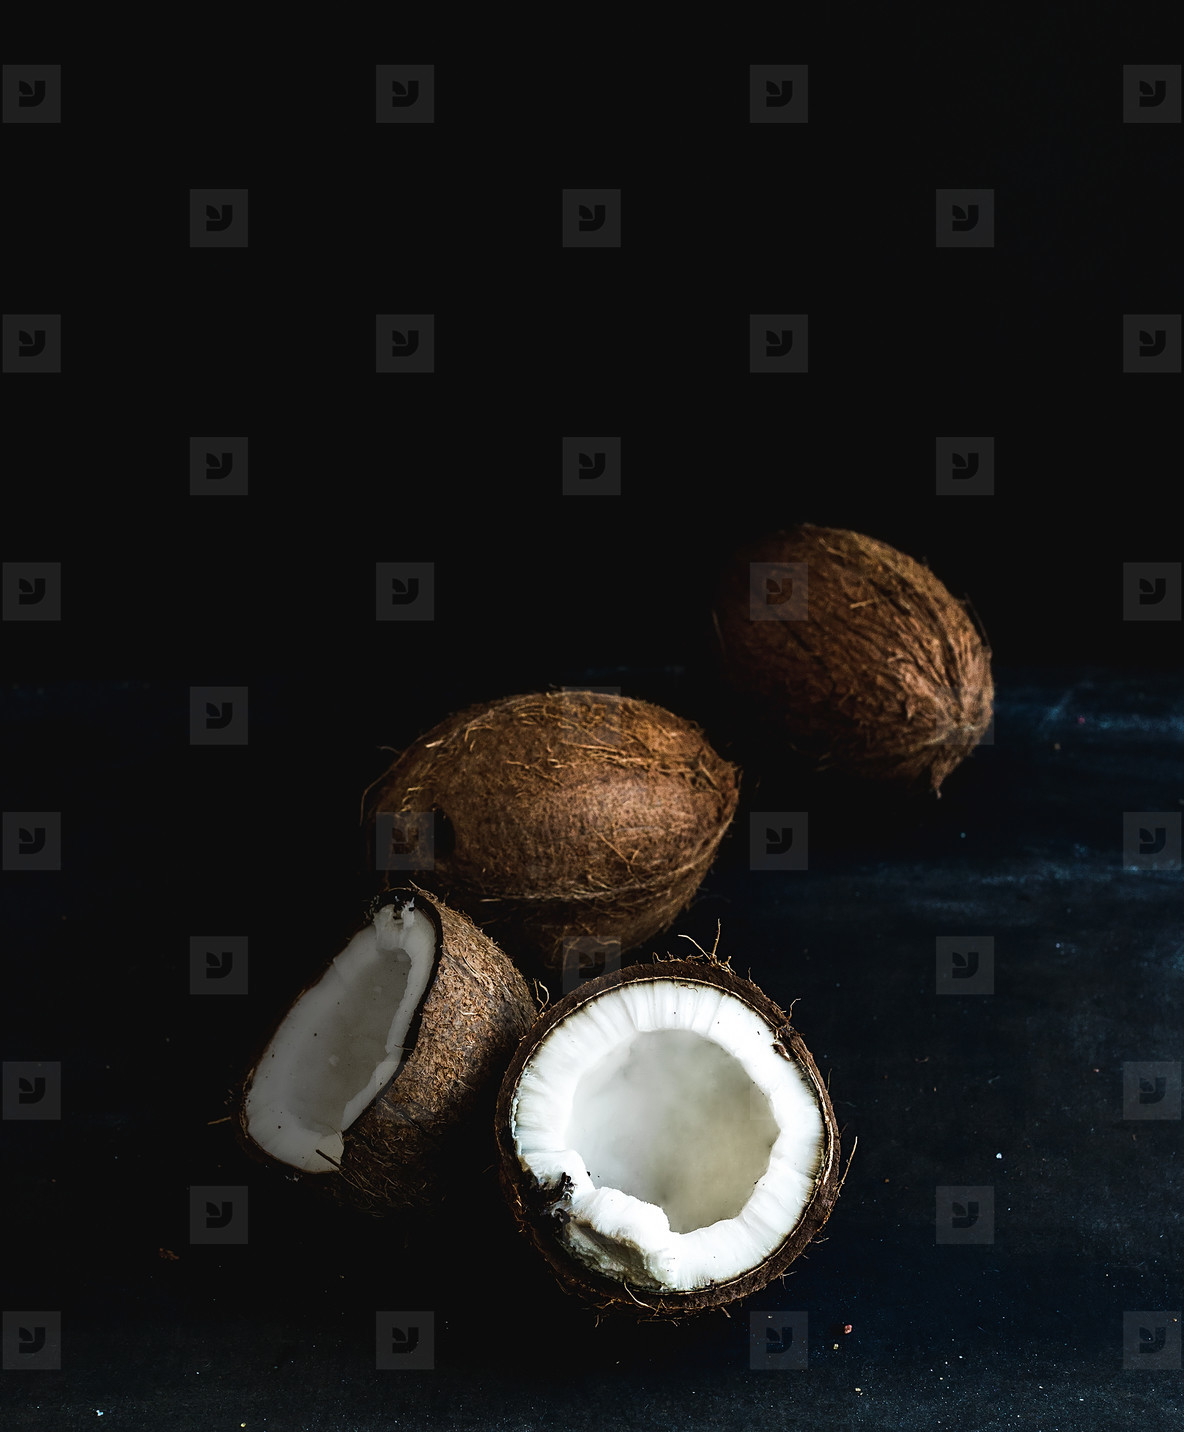 Whole and broken coconuts over dark grunge background